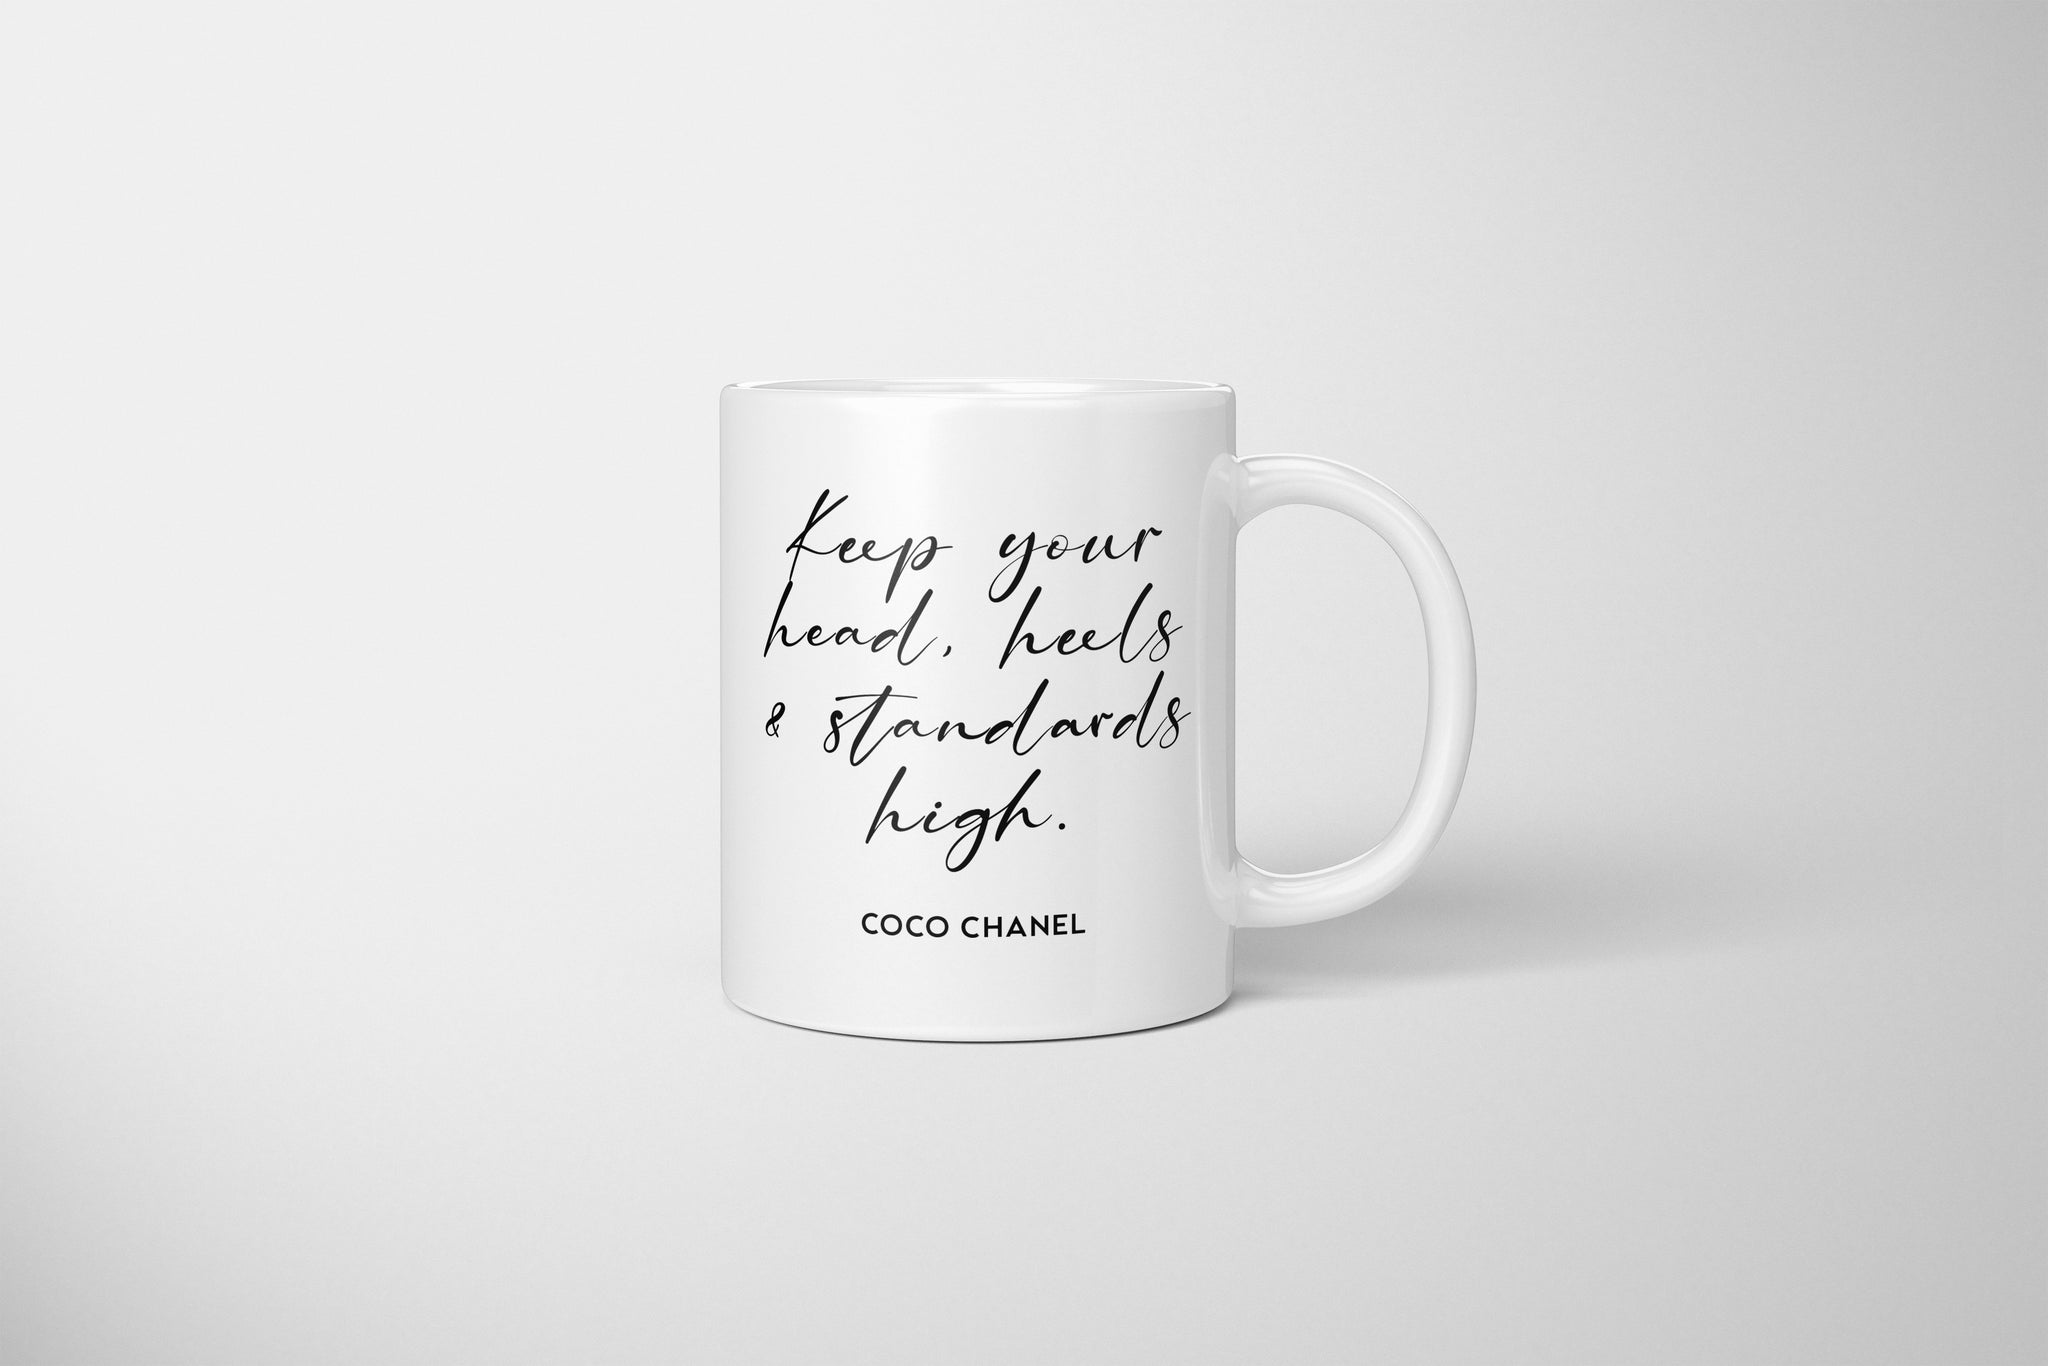 Coco Chanel Mug, Coco Chanel Quotes Mug, Head & Heels, Classy & Fabulous, Coco Chanel Gift, A Girl Should Be Two Things Classy And Fabulous, Keep Your Head, Heels & Standards High Mug, Beauty Begins The Moment You Decide To Be Yourself, Coco Chanel UK Mug